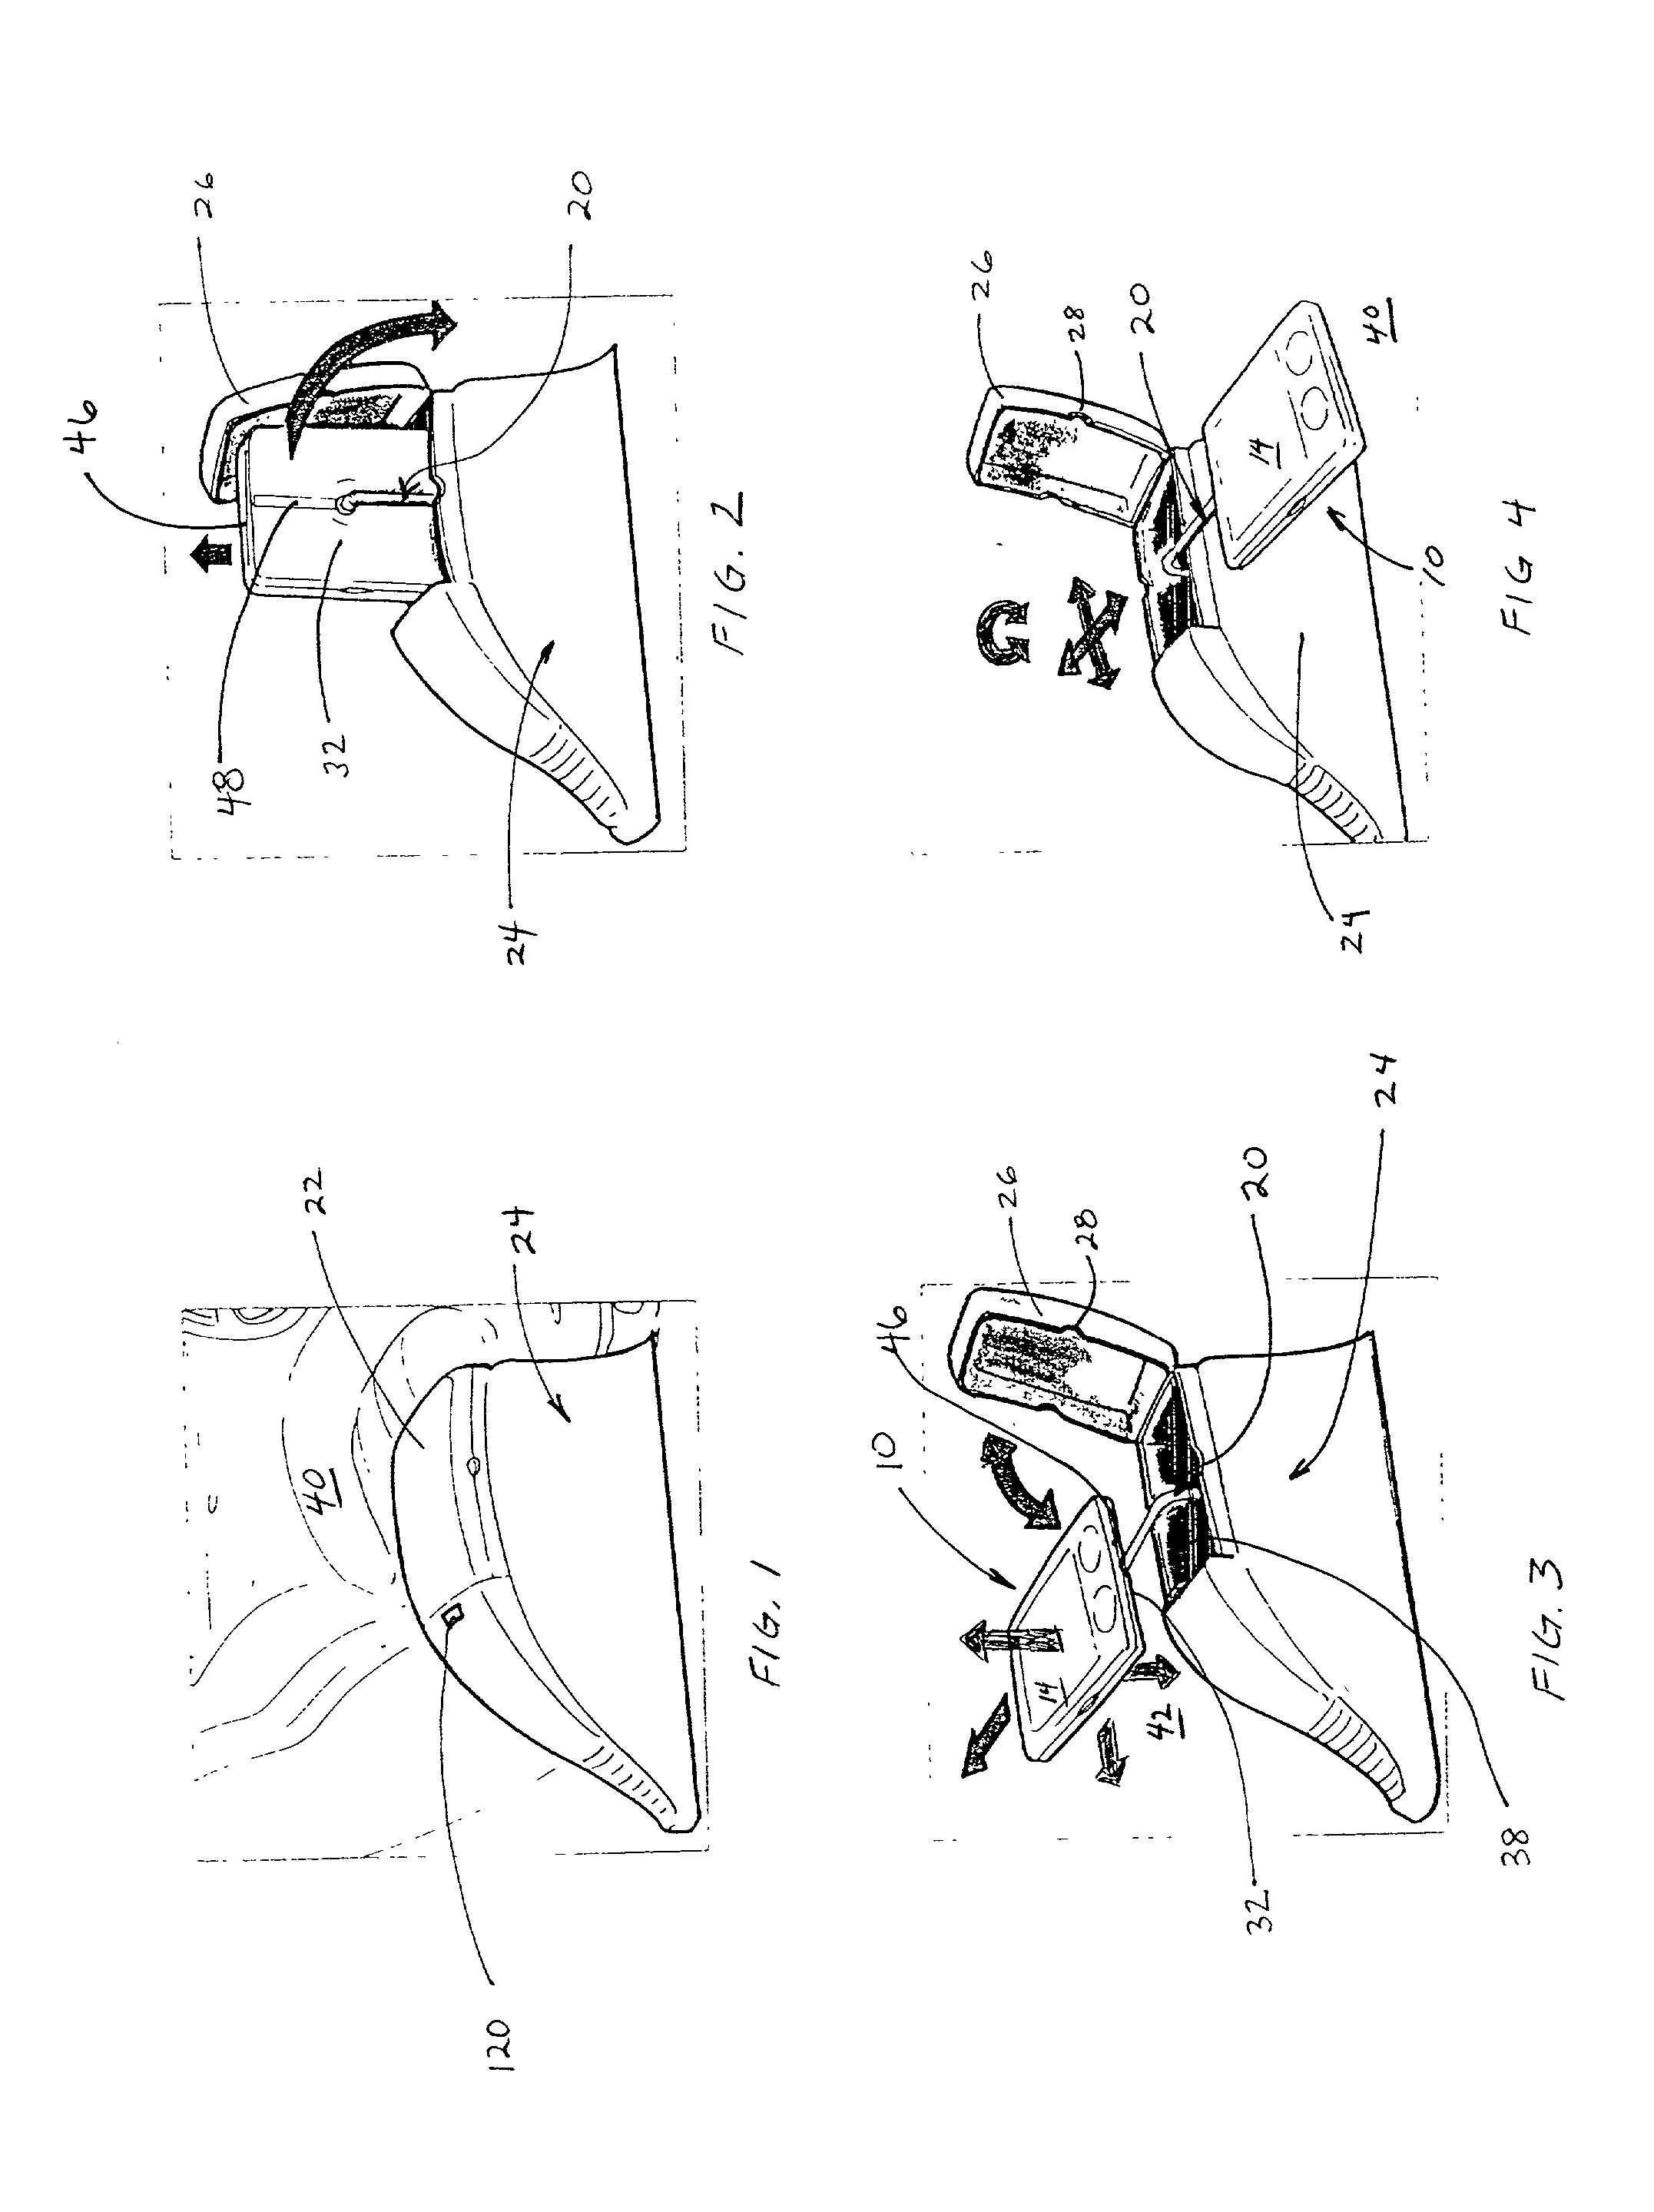 System, method, and support mechanism for supporting objects